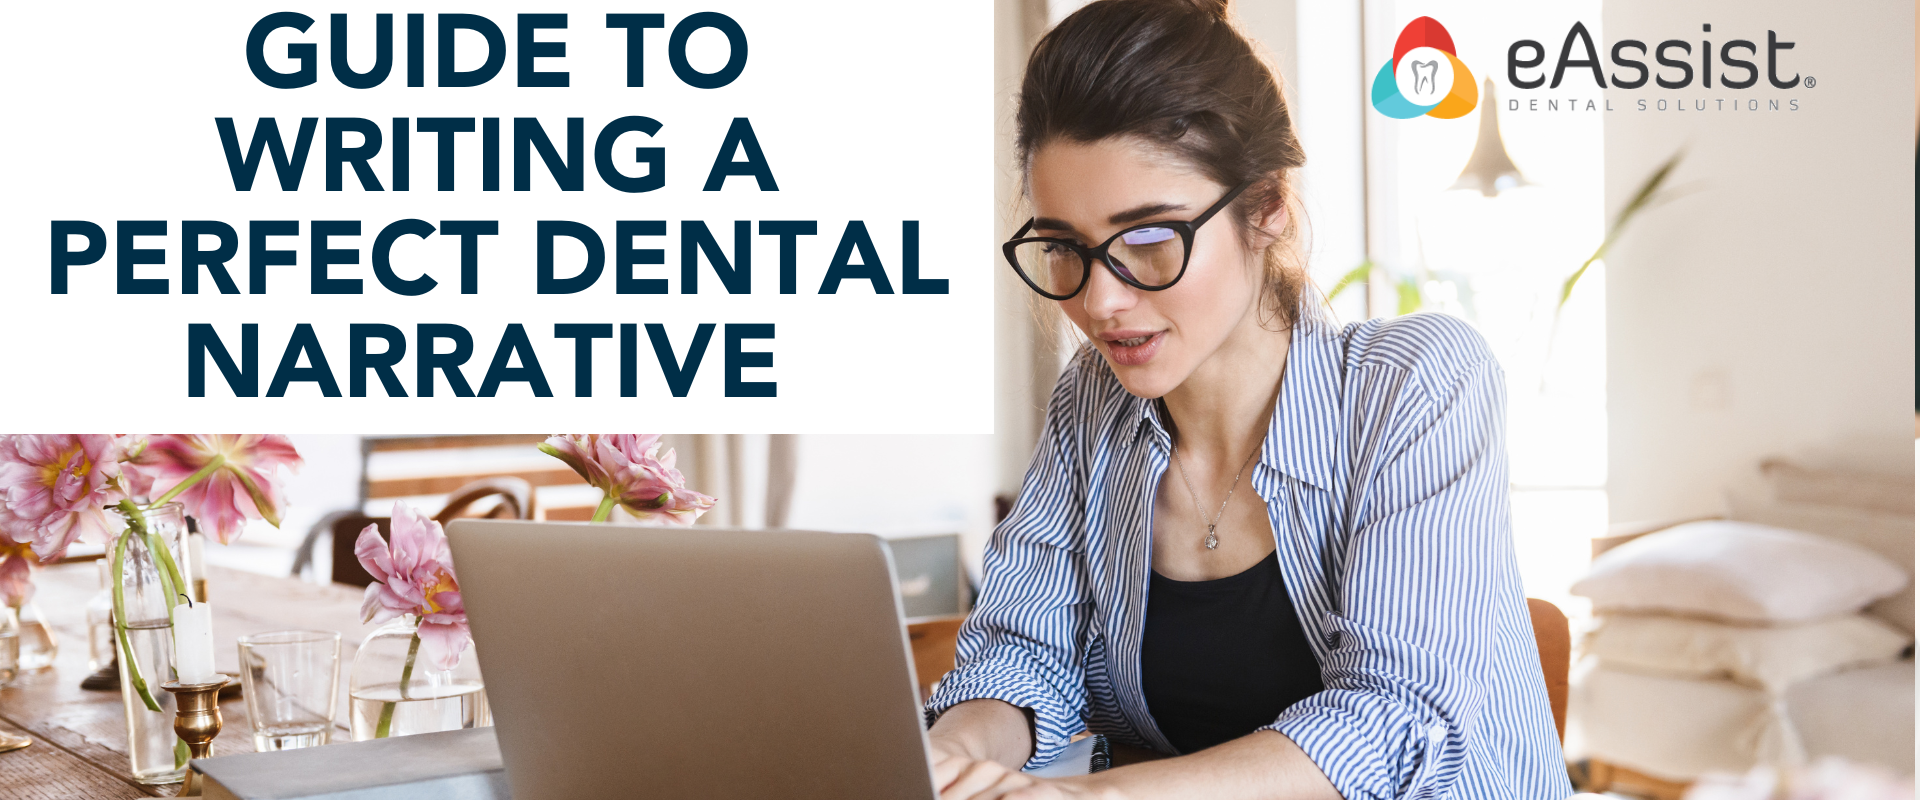 Guide to Writing A Perfect Dental Narrative